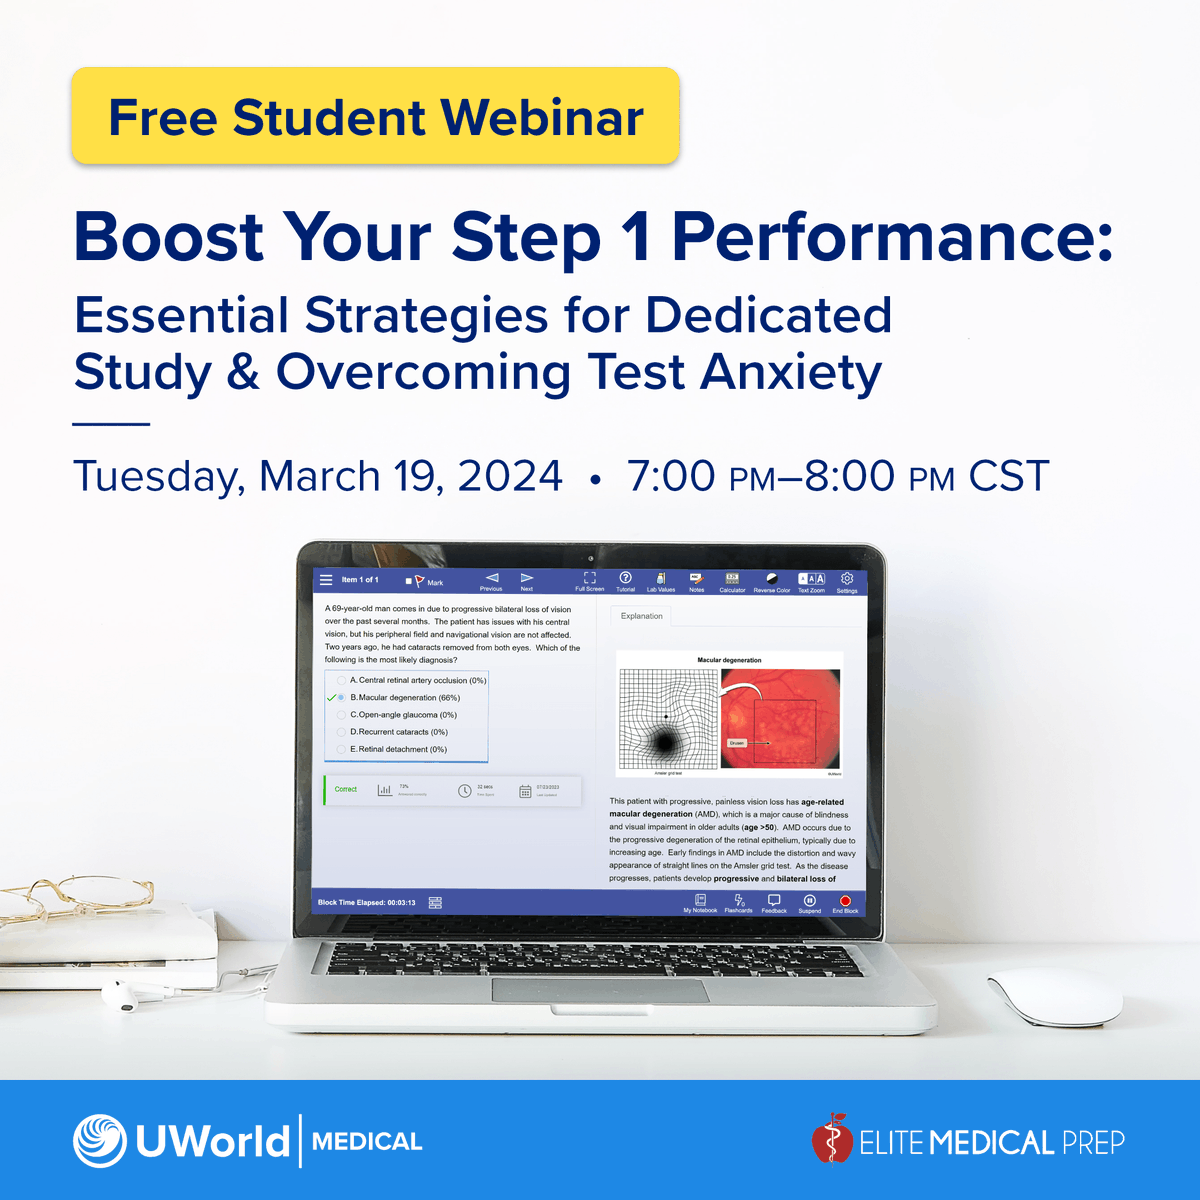 Are you ready to boost your USMLE Step 1 performance? Join clinical experts from UWorld and @elitemedicprep for a free webinar to improve your readiness. When: Tuesday, March 19th at 7:00 p.m. CST Where: bit.ly/4caz21Y #UWorldMedical #EliteMedicalPrep #USMLE #Step1